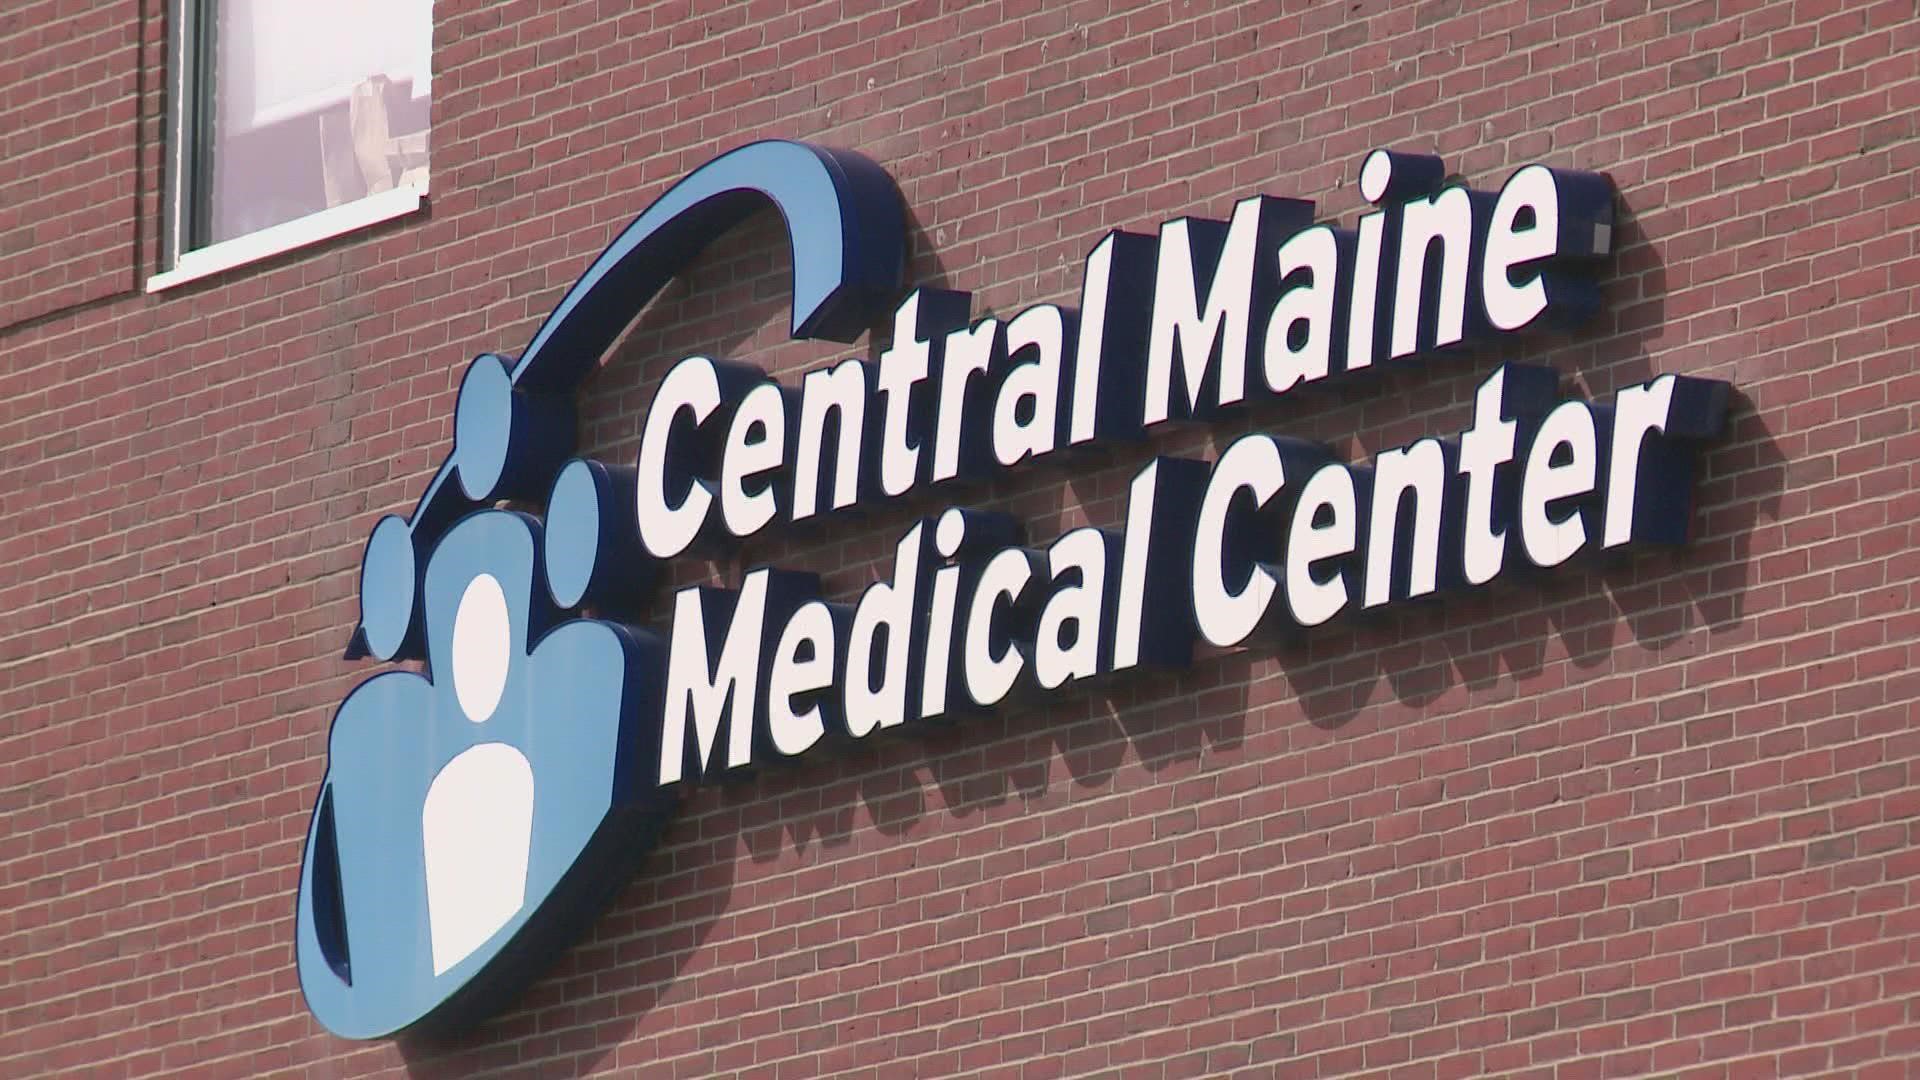 Central Maine Medical Center has temporarily suspended pediatric and trauma admissions as the hospital suffers staffing shortages in many areas in the facility.